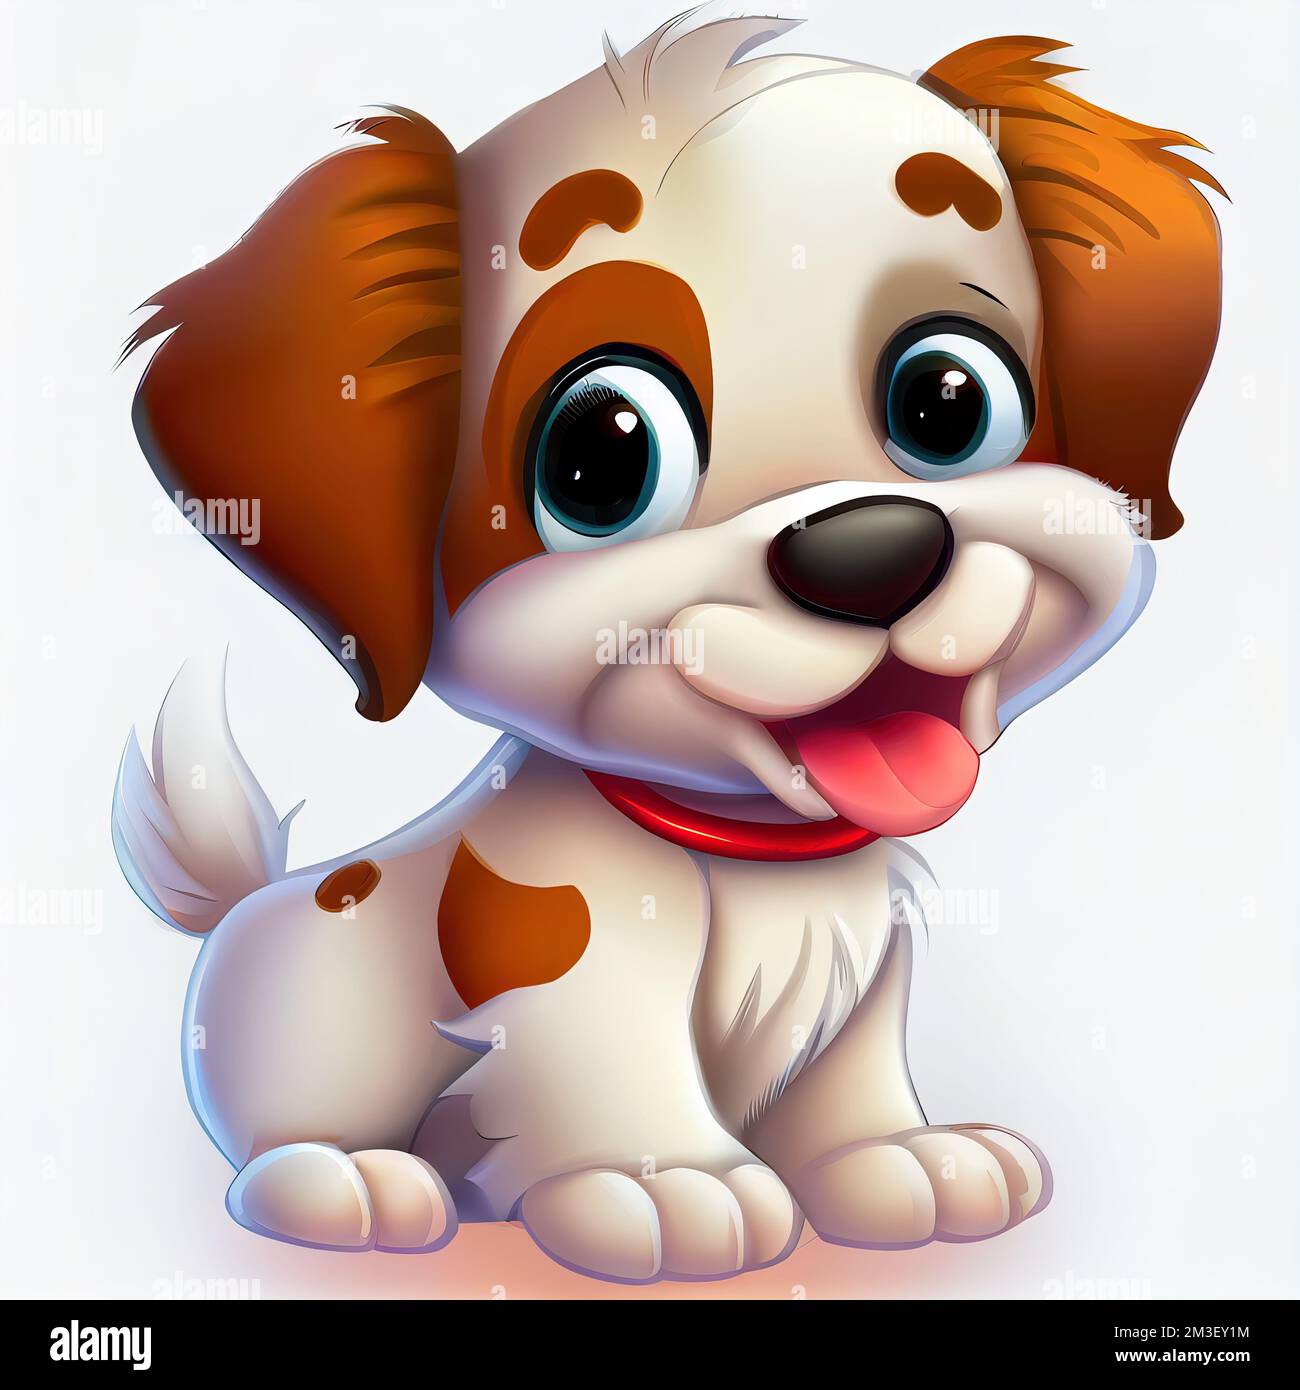 a cartoon dog with a red collar and big eyes sitting down and smiling at  the camera with a white background Stock Photo - Alamy